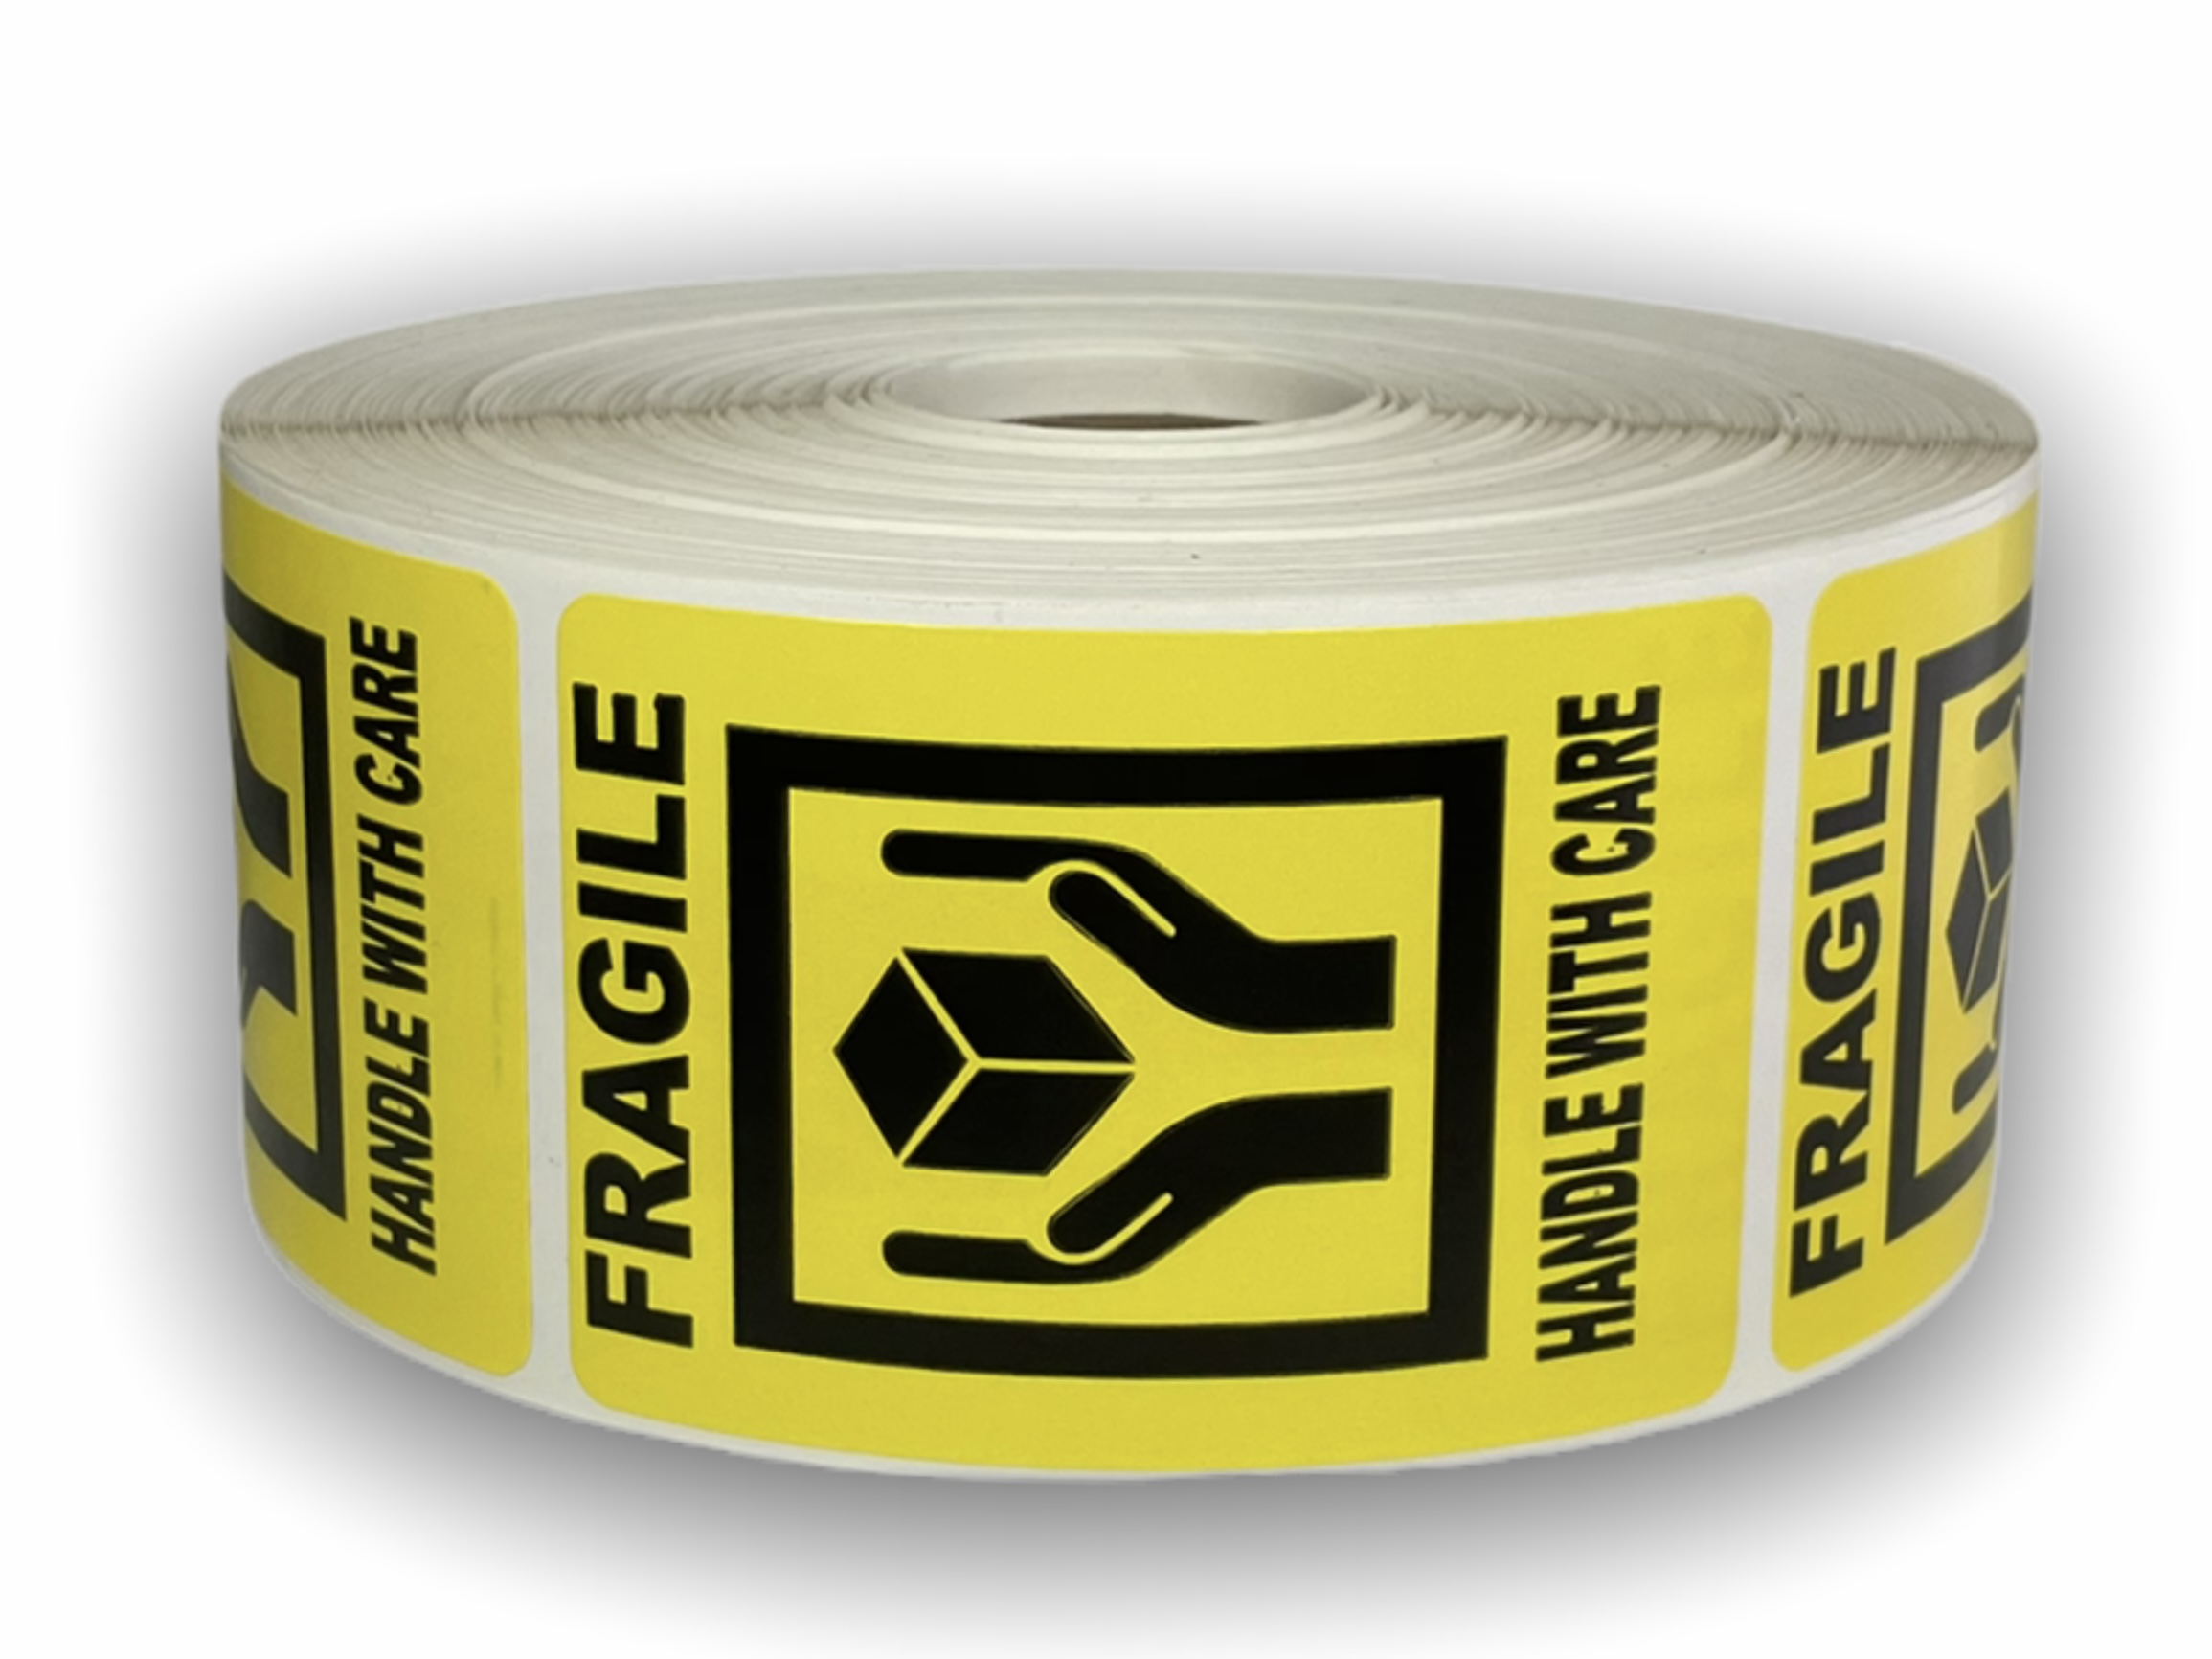 Yellow Fragile Hands Holding the Box Stickers | 2"x3" | 500 Labels 1 Roll | Free Shipping!